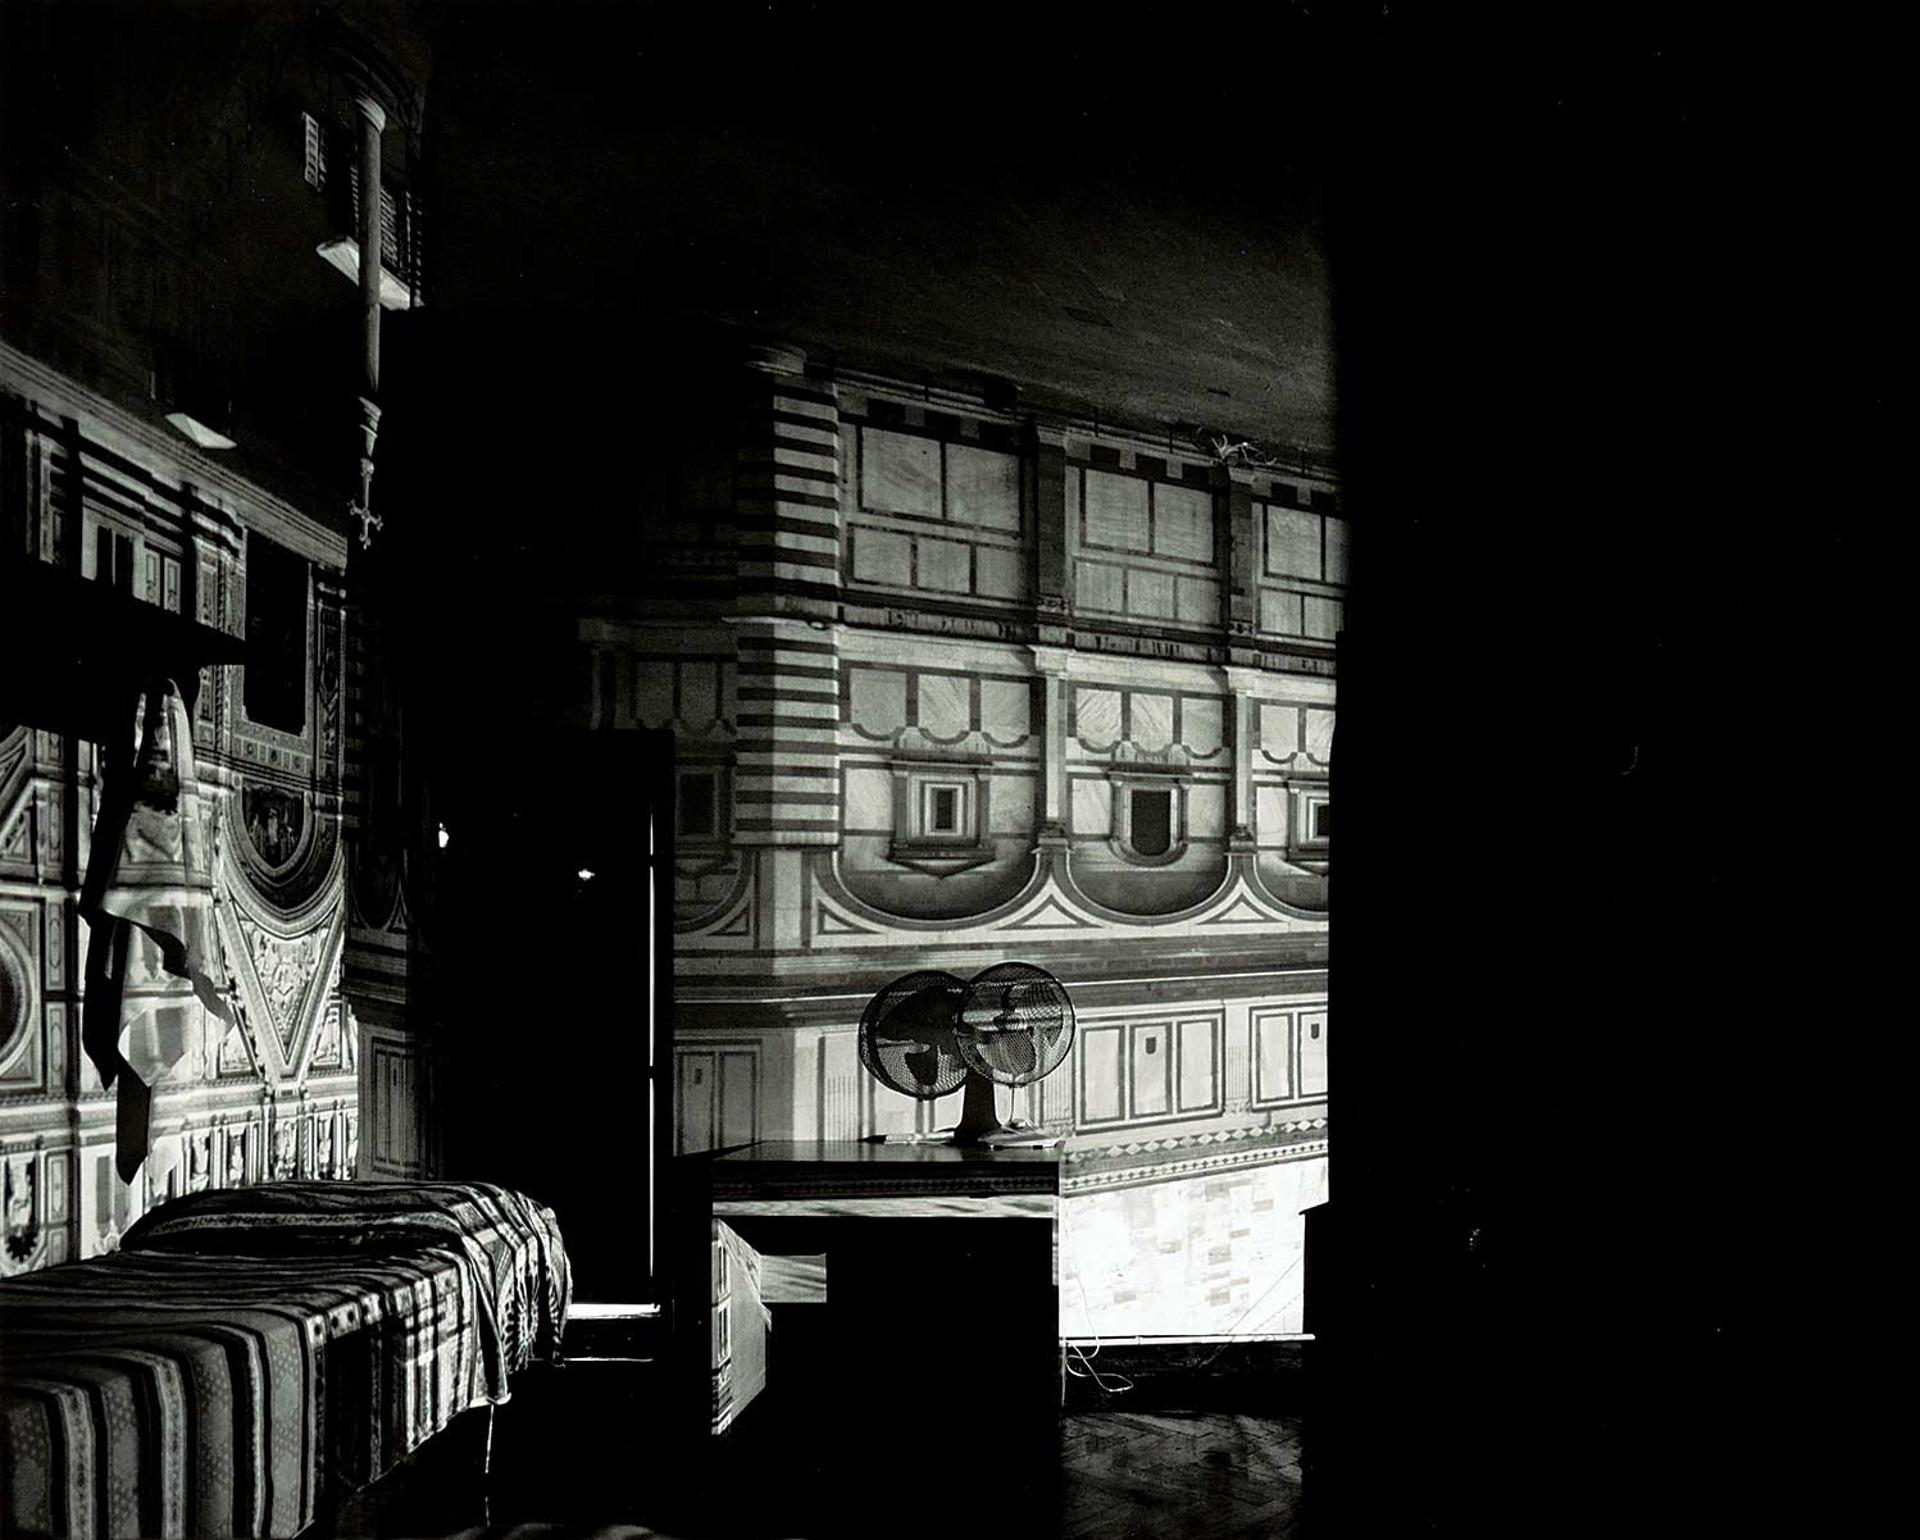 Abelardo Morell - Camera Obscura Image of the Florence Baptistry in Hotel Room  #2/30